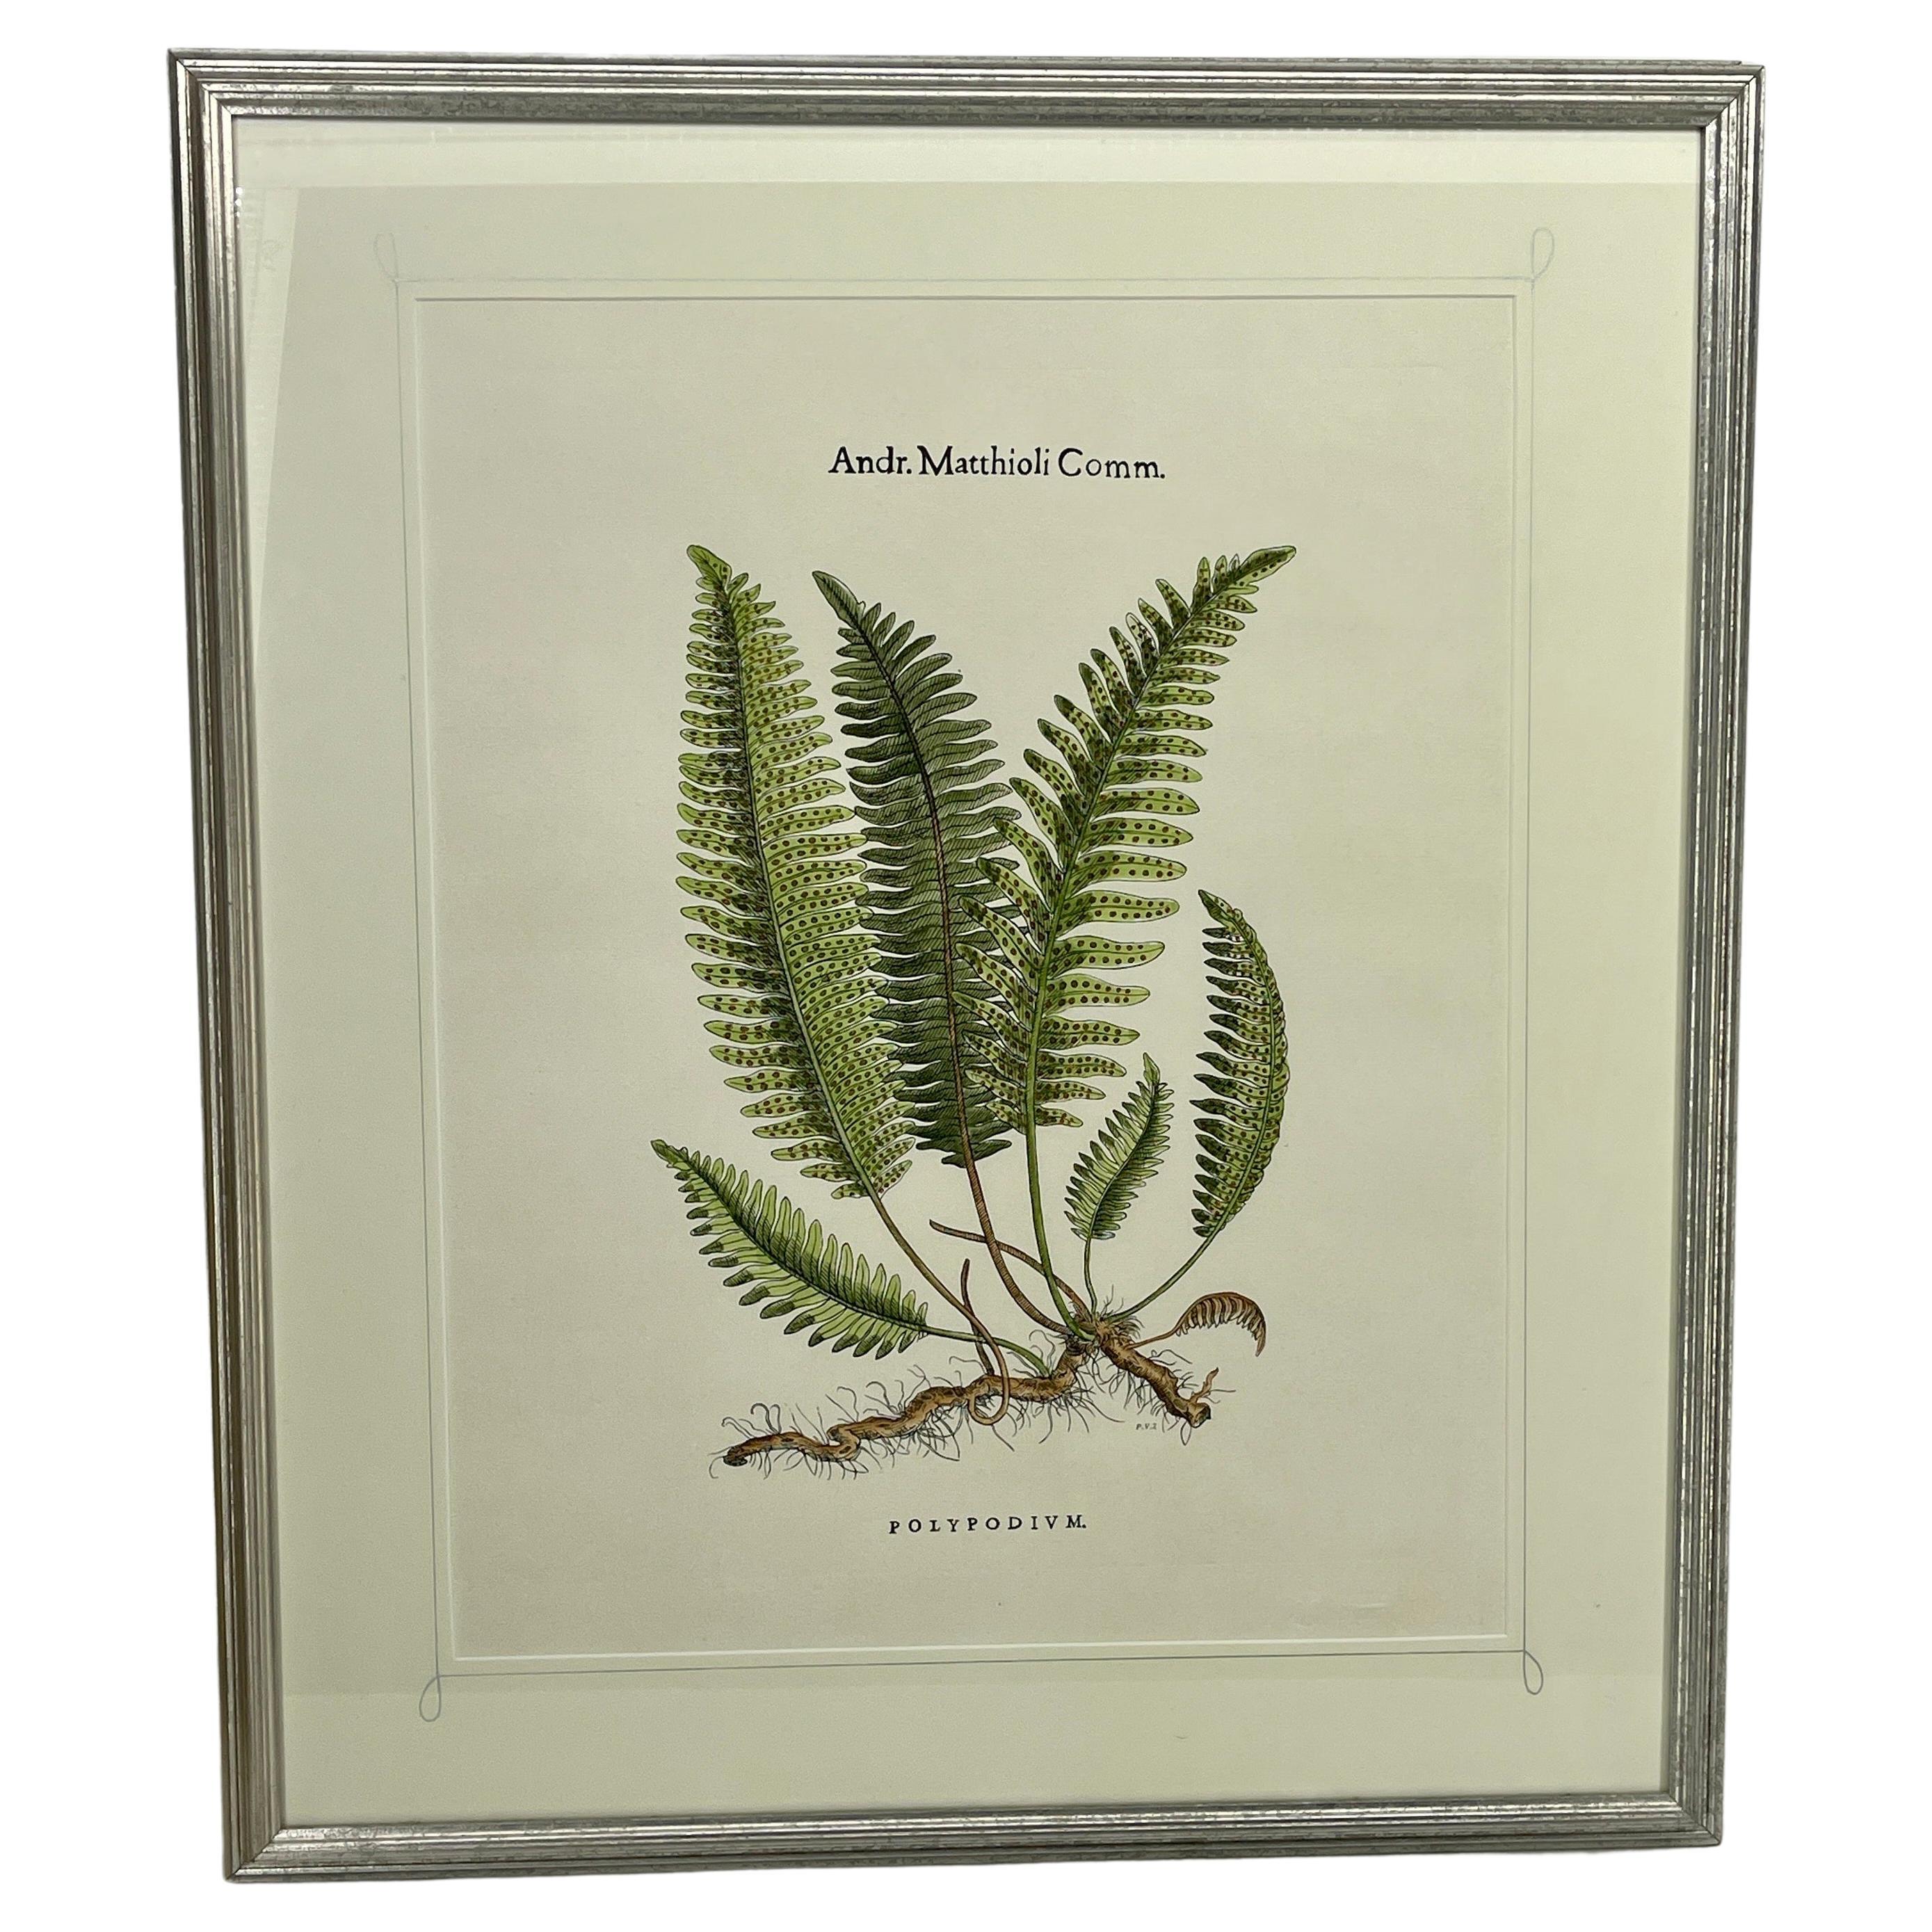 A Large Pair of Hand-Colored Botanical Fern Prints with Makers Stamp, Italy 1960's

Custom framed set from Andr. Matthioli that are presented in classic silver leaf frames. A heightened level of elegance and extravagance has been be added to these